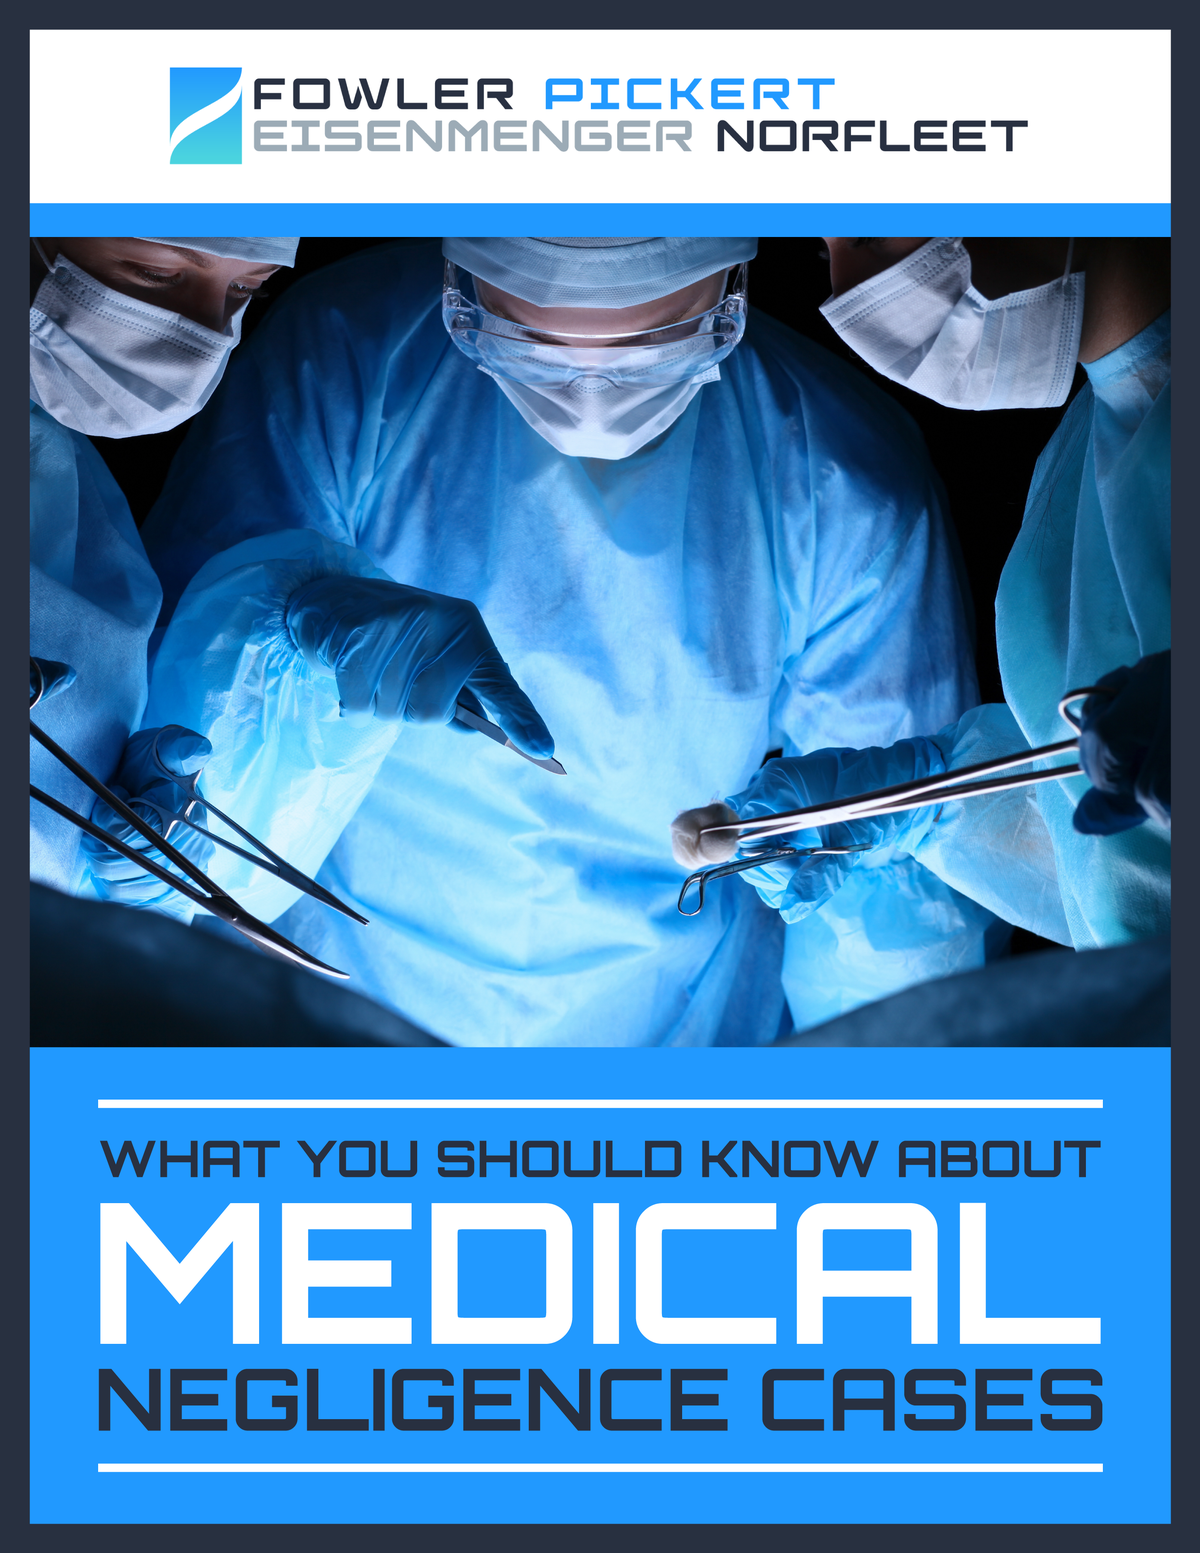 What You Should Know About Medical Negligence Cases | Missouri Medical Negligence Lawyer